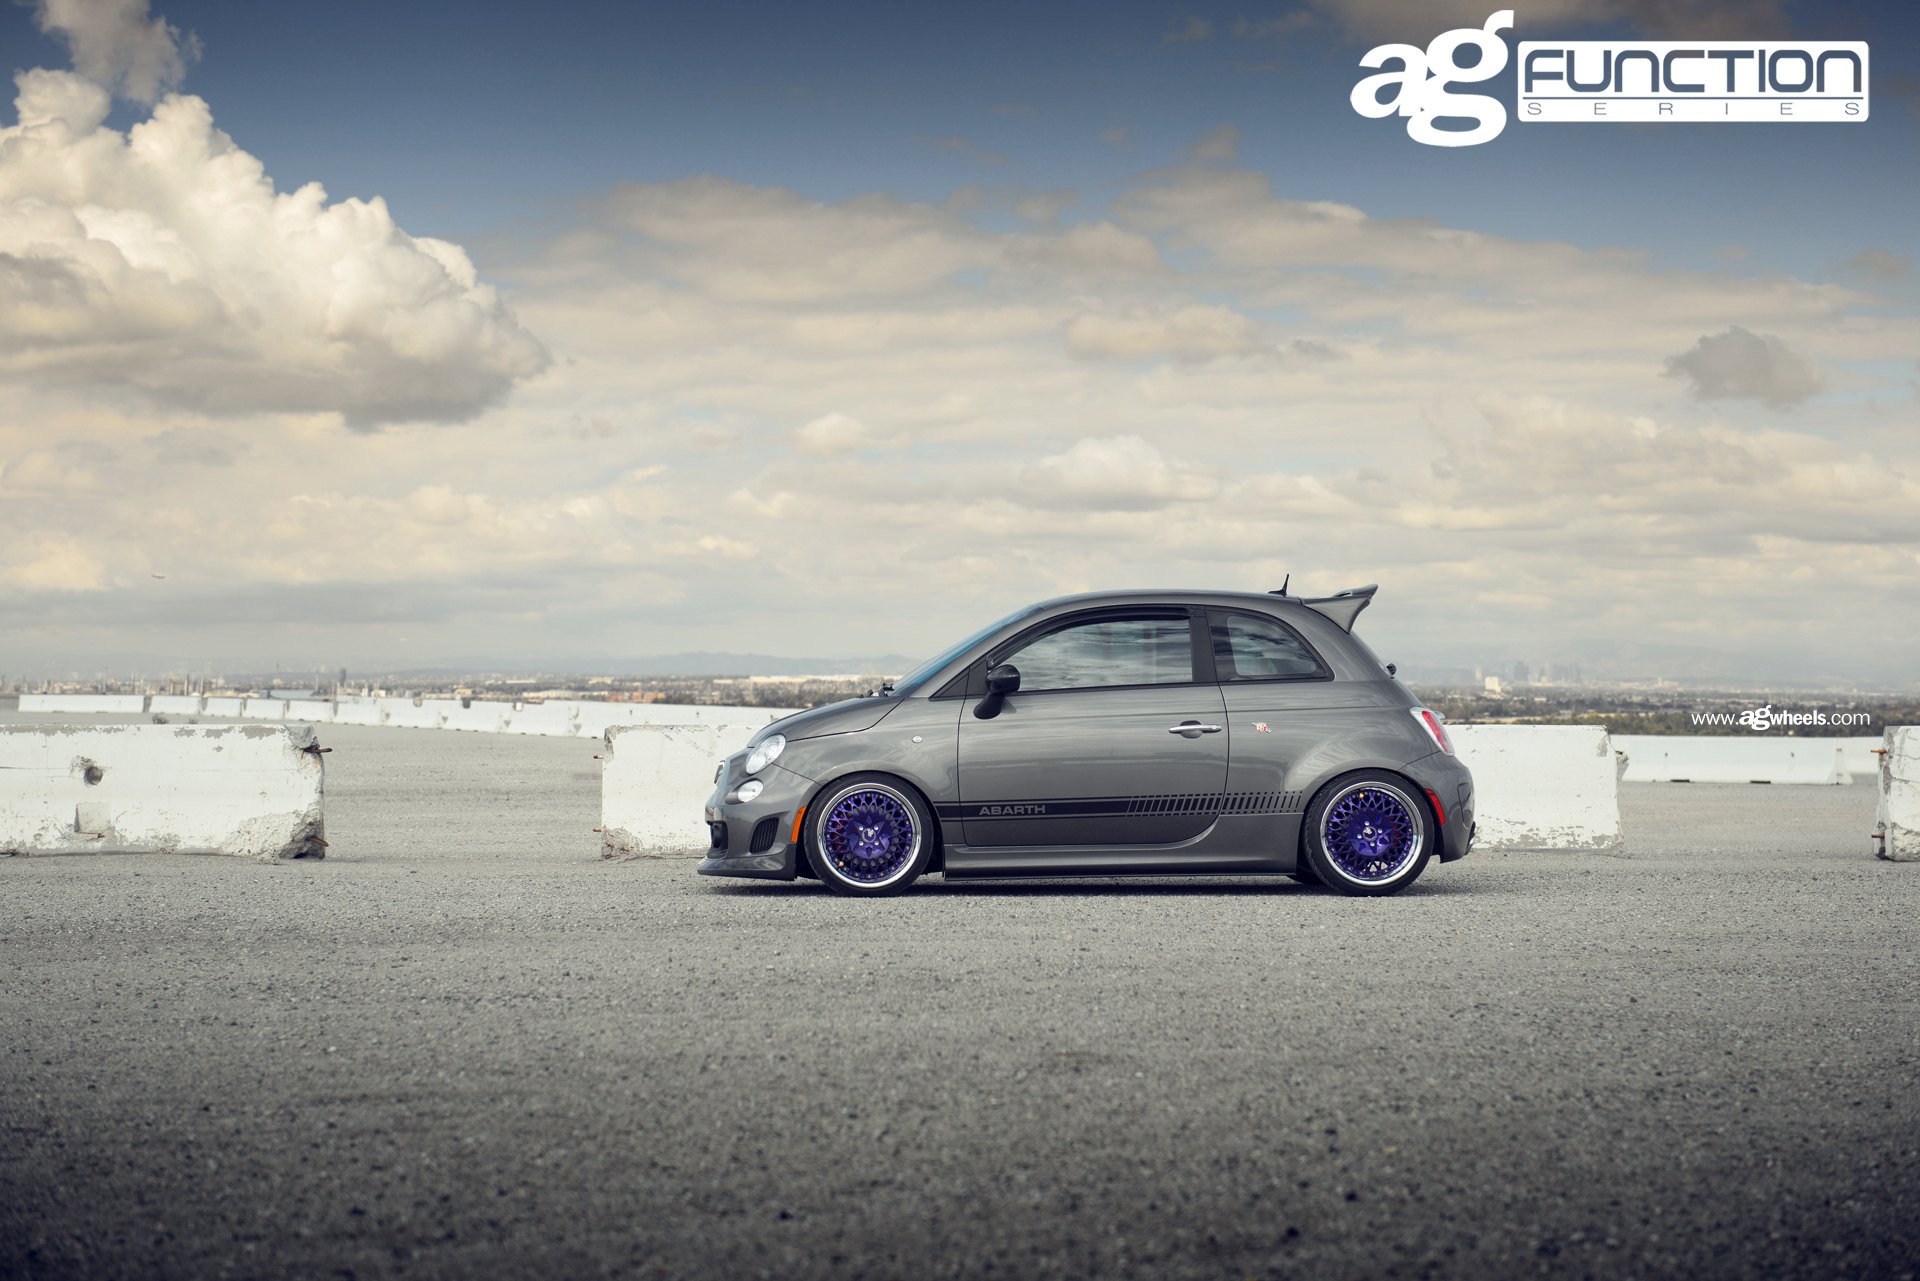 Aftermarket Side Skirts on Gray Fiat 500 Abarth - Photo by Avant Garde Wheels